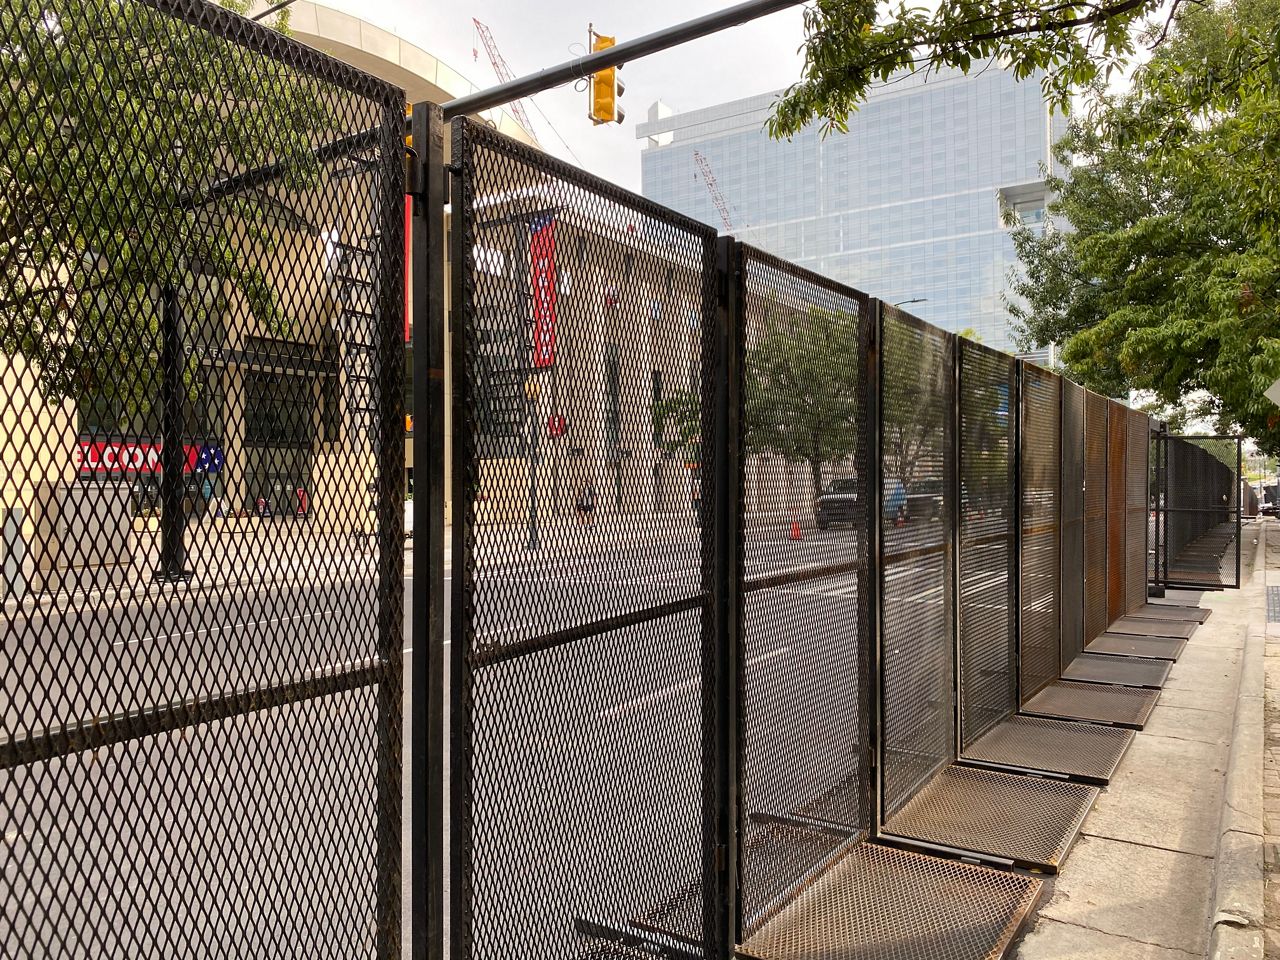 Barricades erected prior to RNC in Charlotte